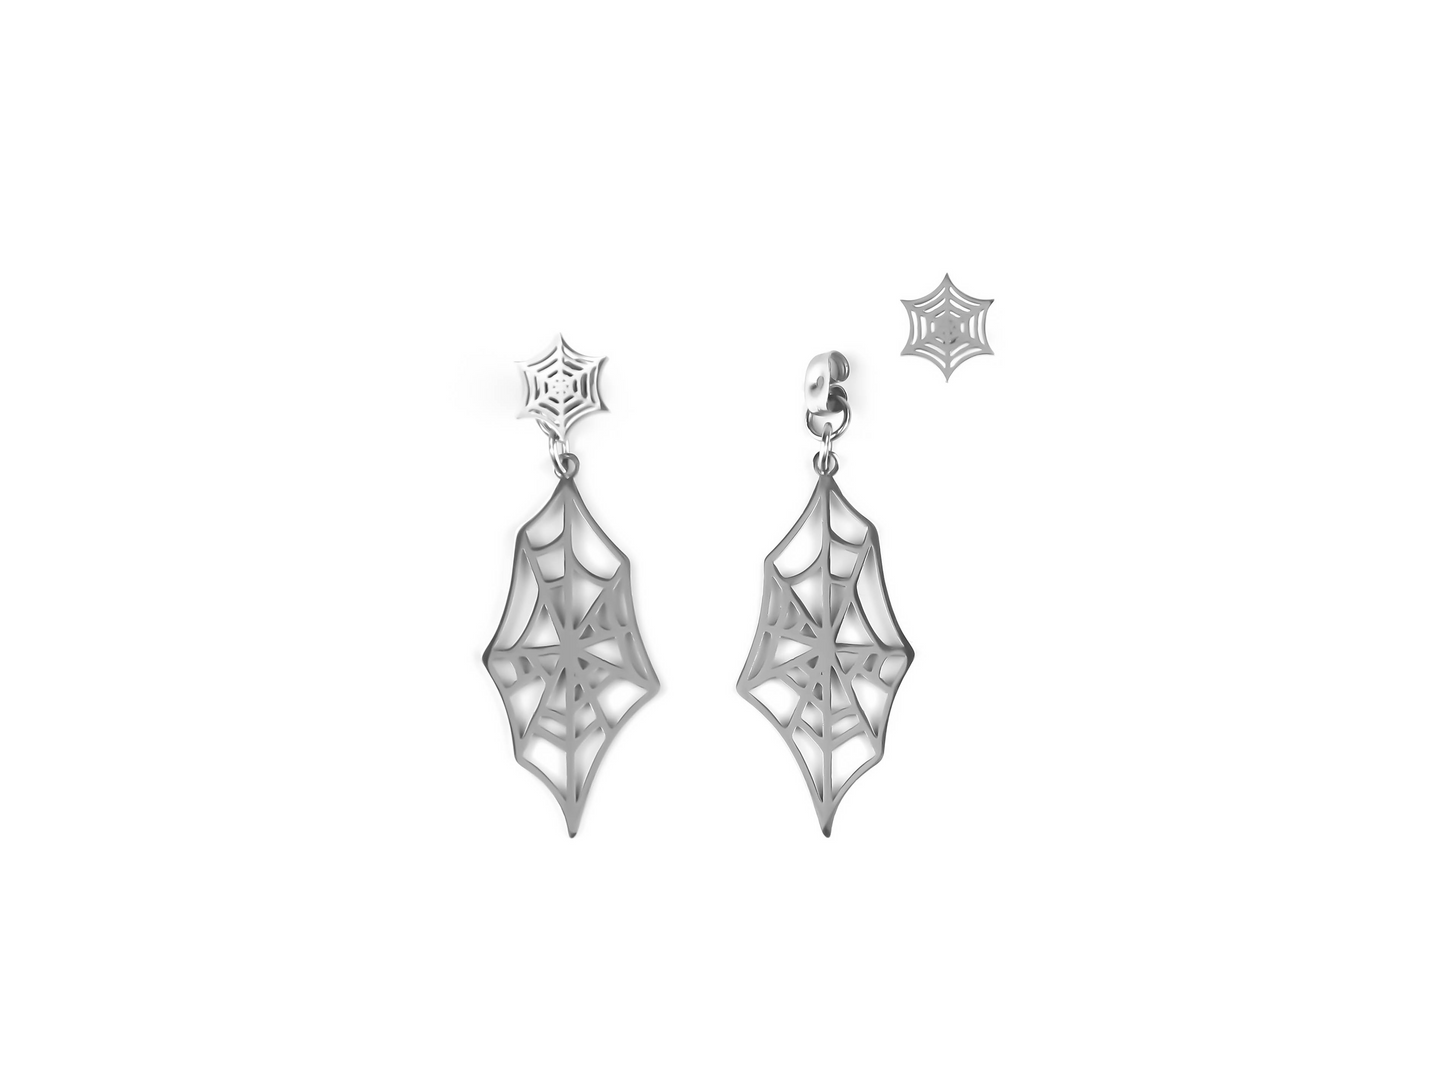 Exquisite Myril Jewels spiderweb earrings, showcasing a pristine silver finish that captures the spirit of Halloween jewelry. These neo-gothic pieces feature a delicate web design, embodying the gothic-chic and whimsigoth trends. Ideal for witchcore enthusiasts, these earrings are versatile for everyday wear, reflecting a minimal goth aesthetic, and are a statement accessory for any rave party or festival look, seamlessly aligning with the dark-avantgarde essence of the brand.